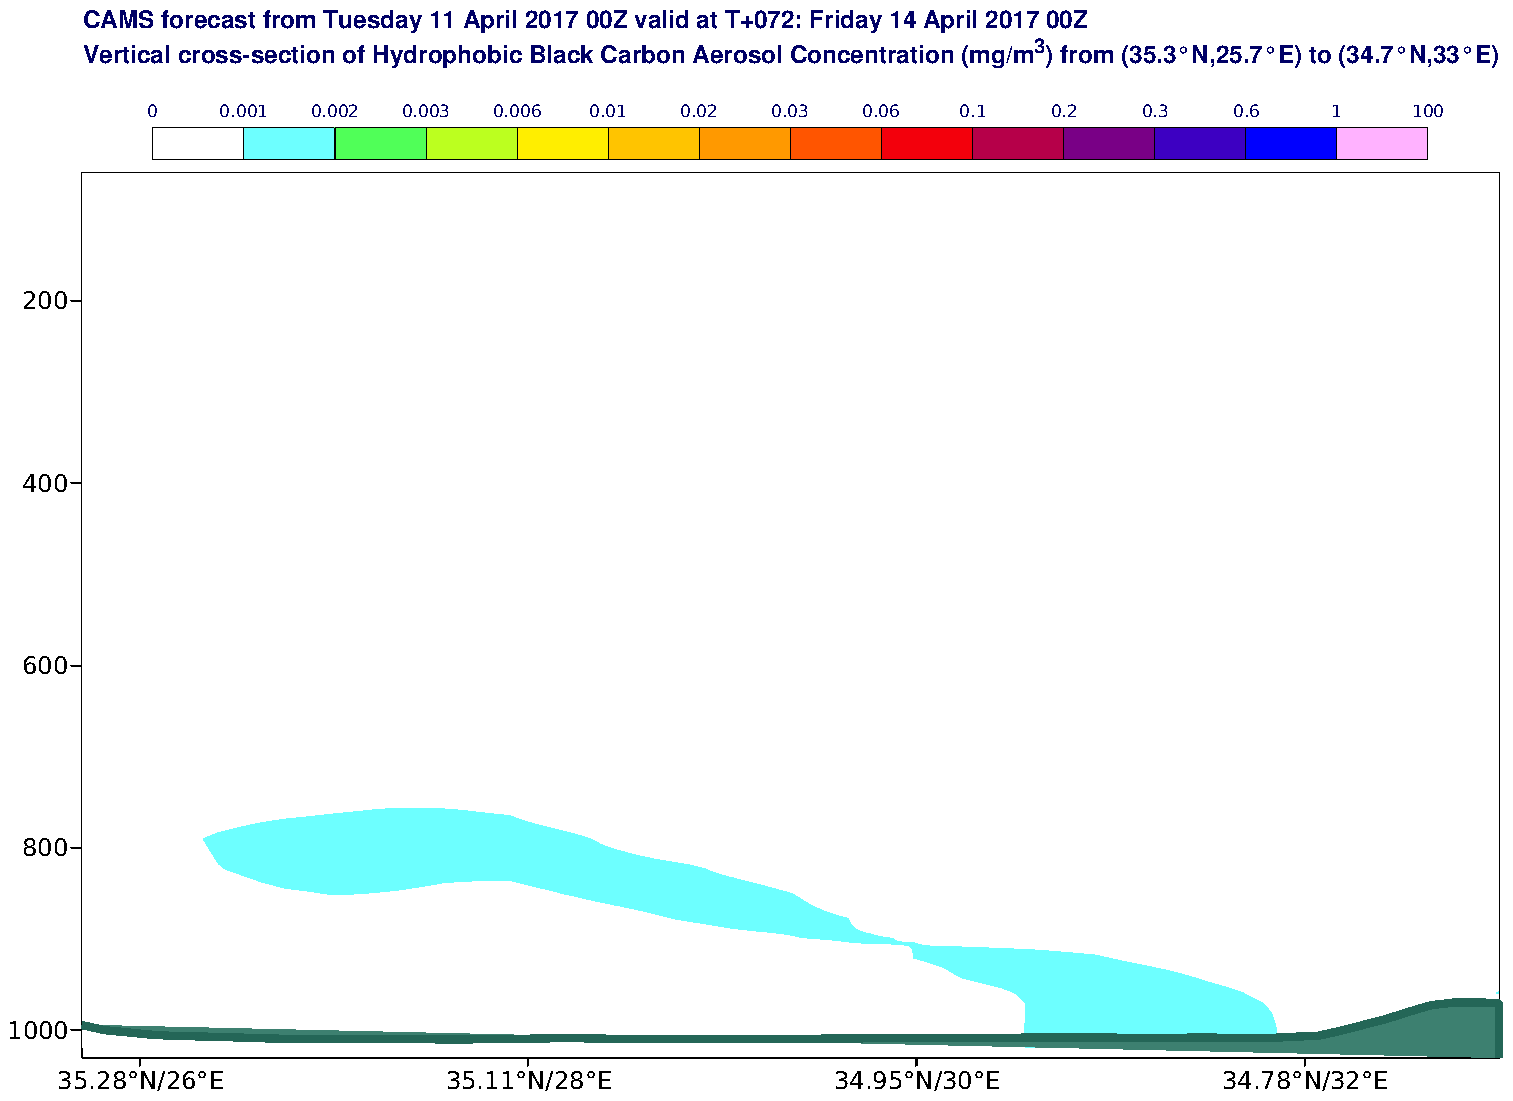 Vertical cross-section of Hydrophobic Black Carbon Aerosol Concentration (mg/m3) valid at T72 - 2017-04-14 00:00